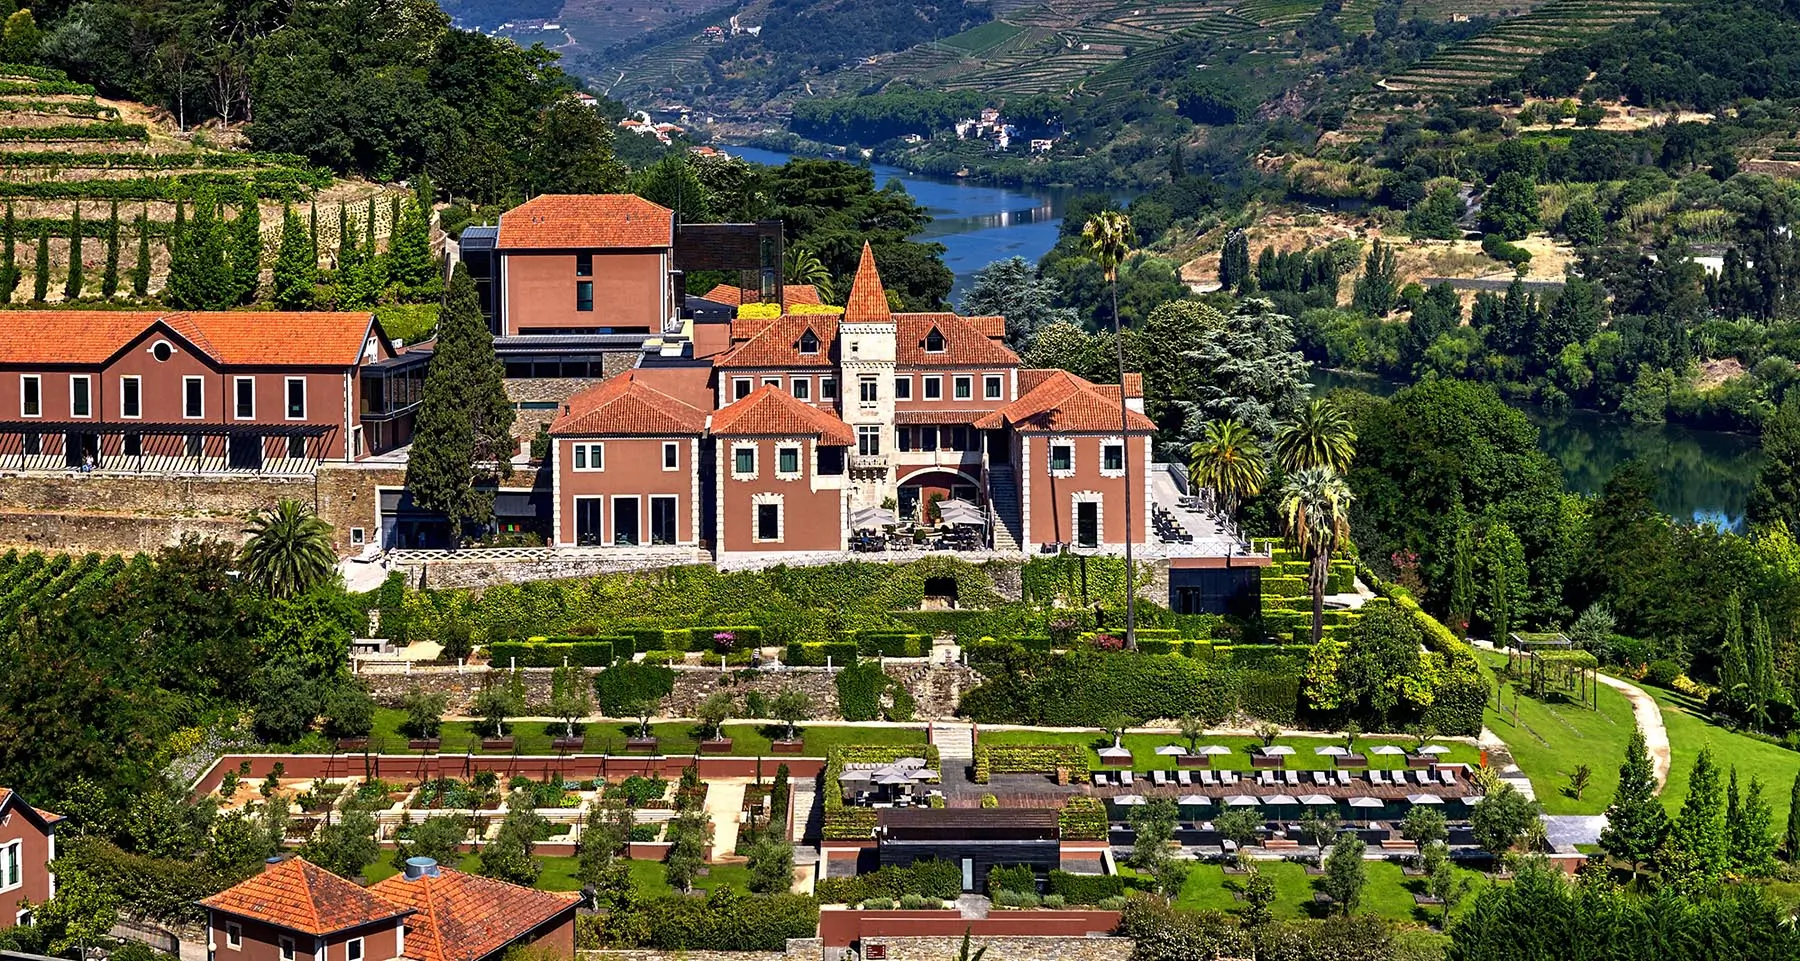 Six Senses luxury hotel and grounds in lush Douro Valley in Portugal